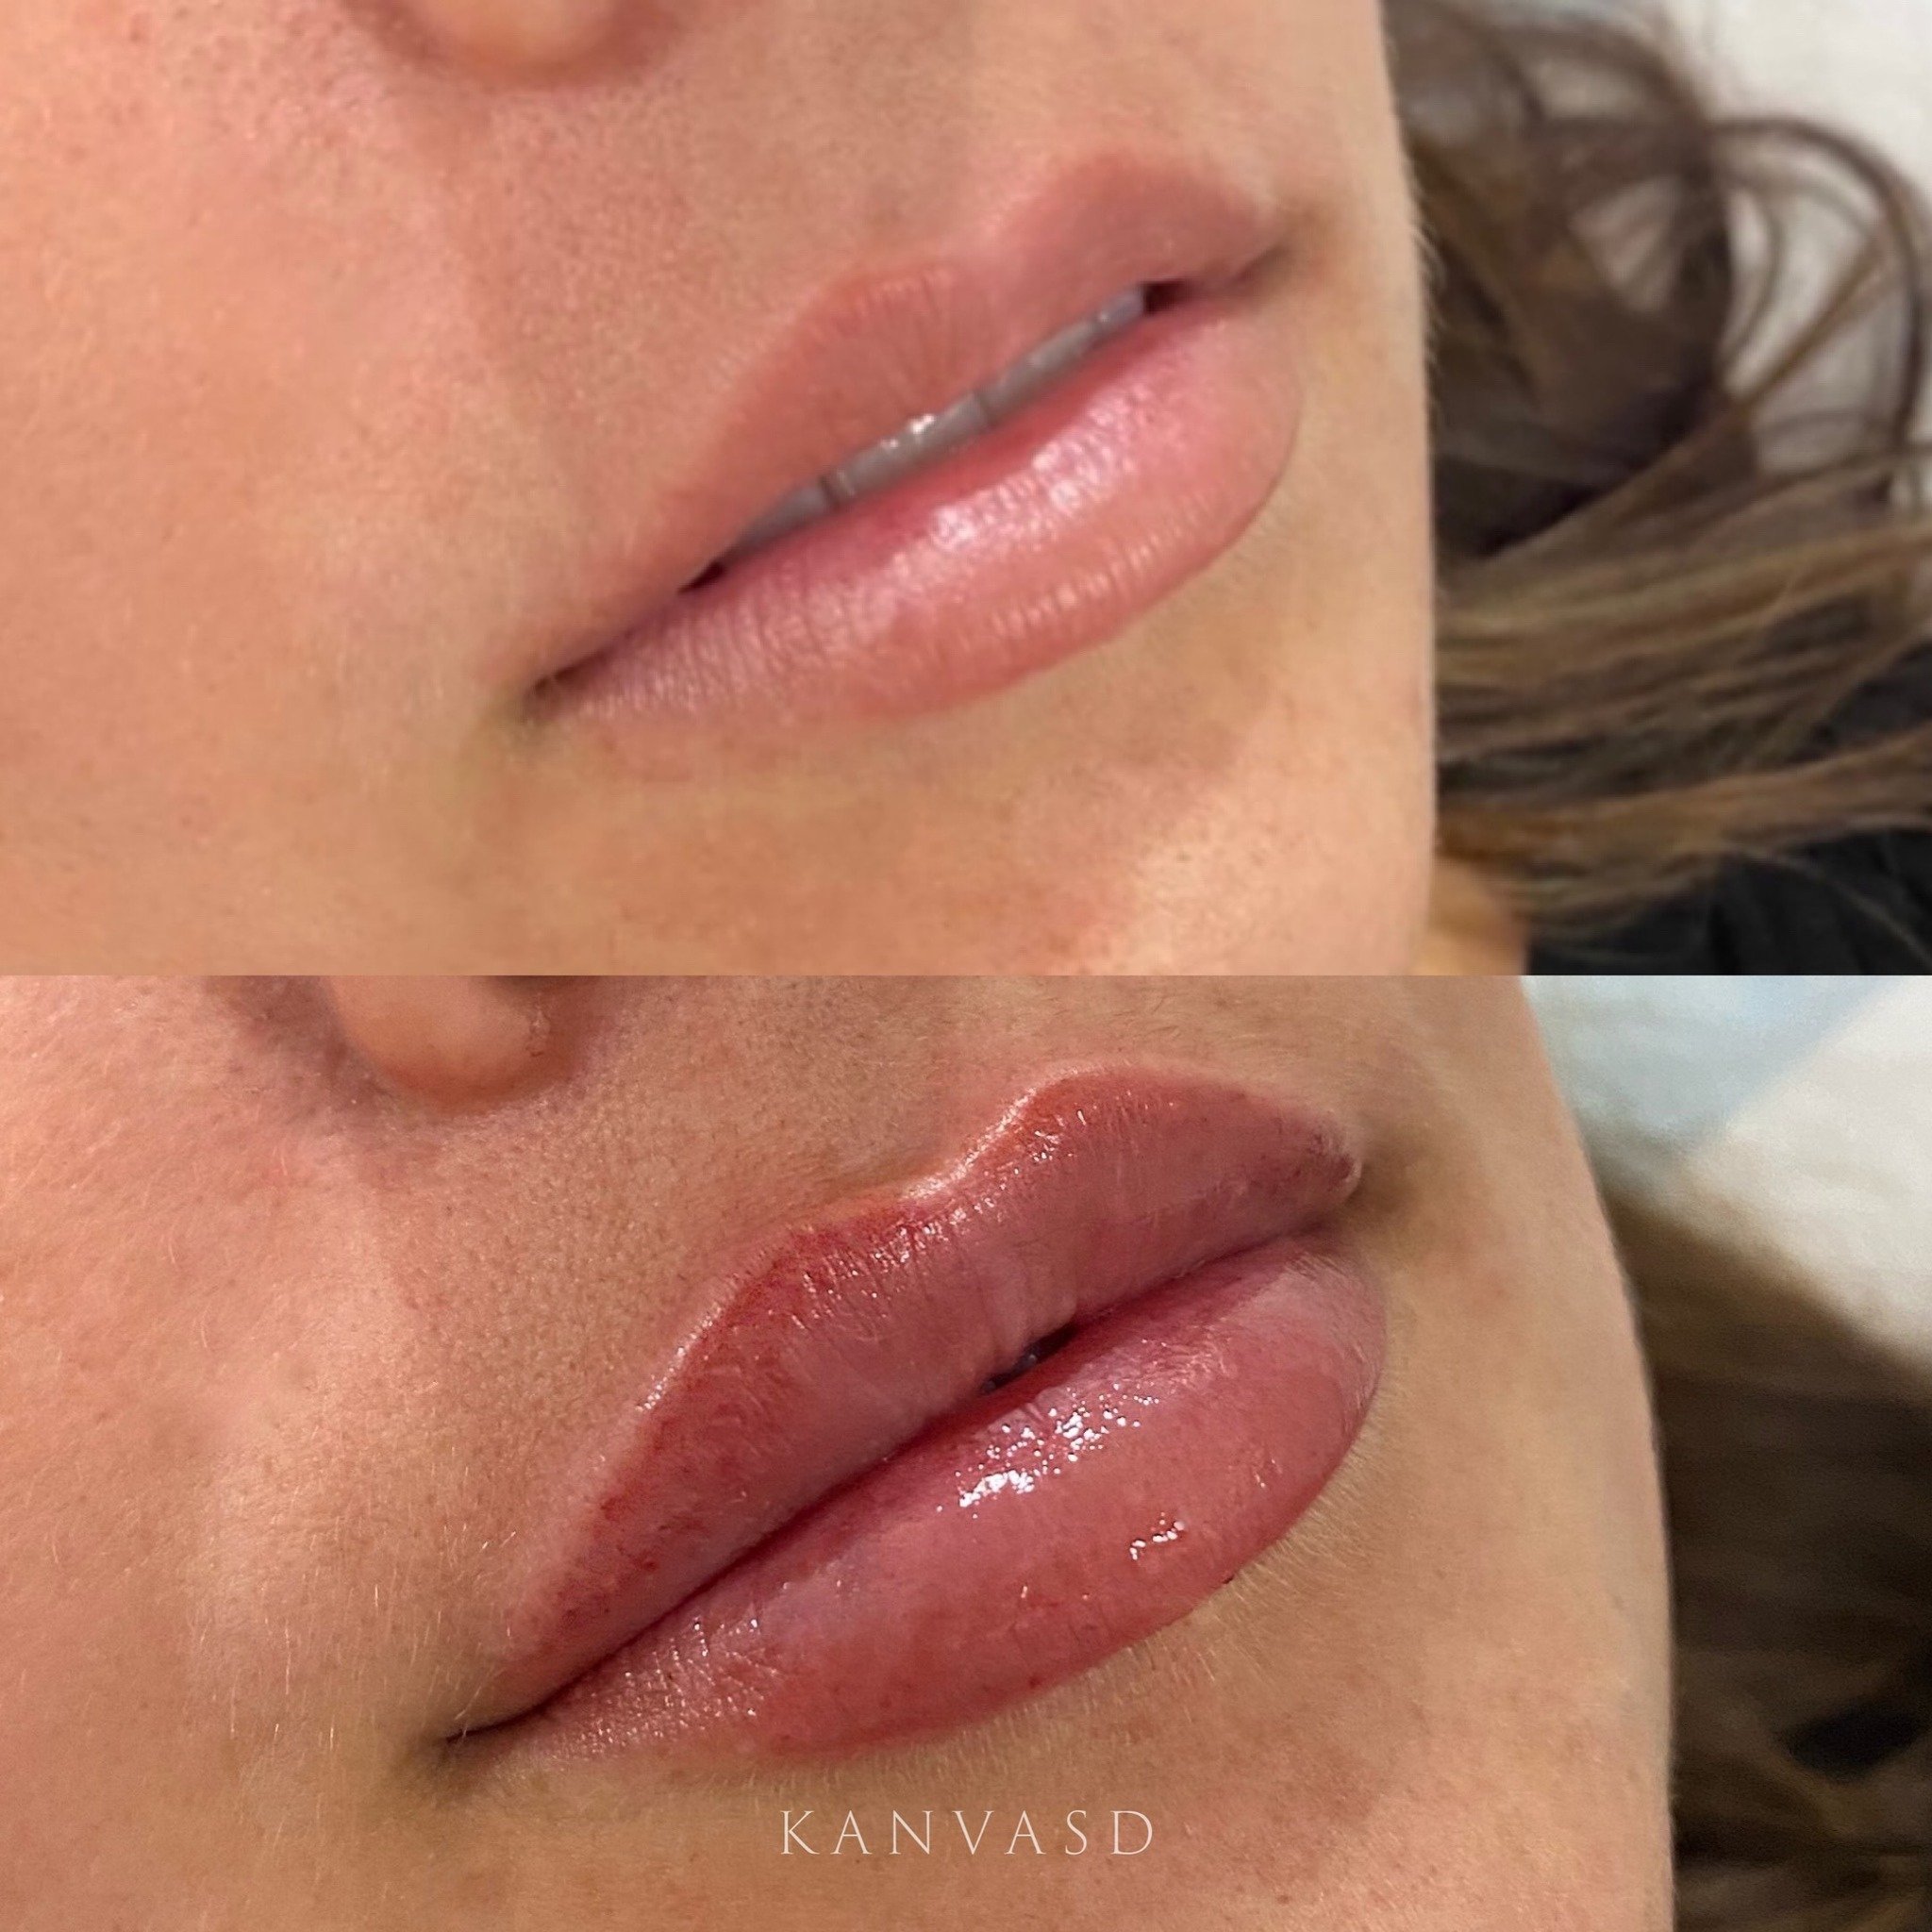 At Kanvasd, we provide a tailored and unique treatment plan for each individual. Our nurses specialise in assessing facial anatomy and can provide personalised consultations regarding cosmetic injectables and skin treatments.

Practitioner: Registere